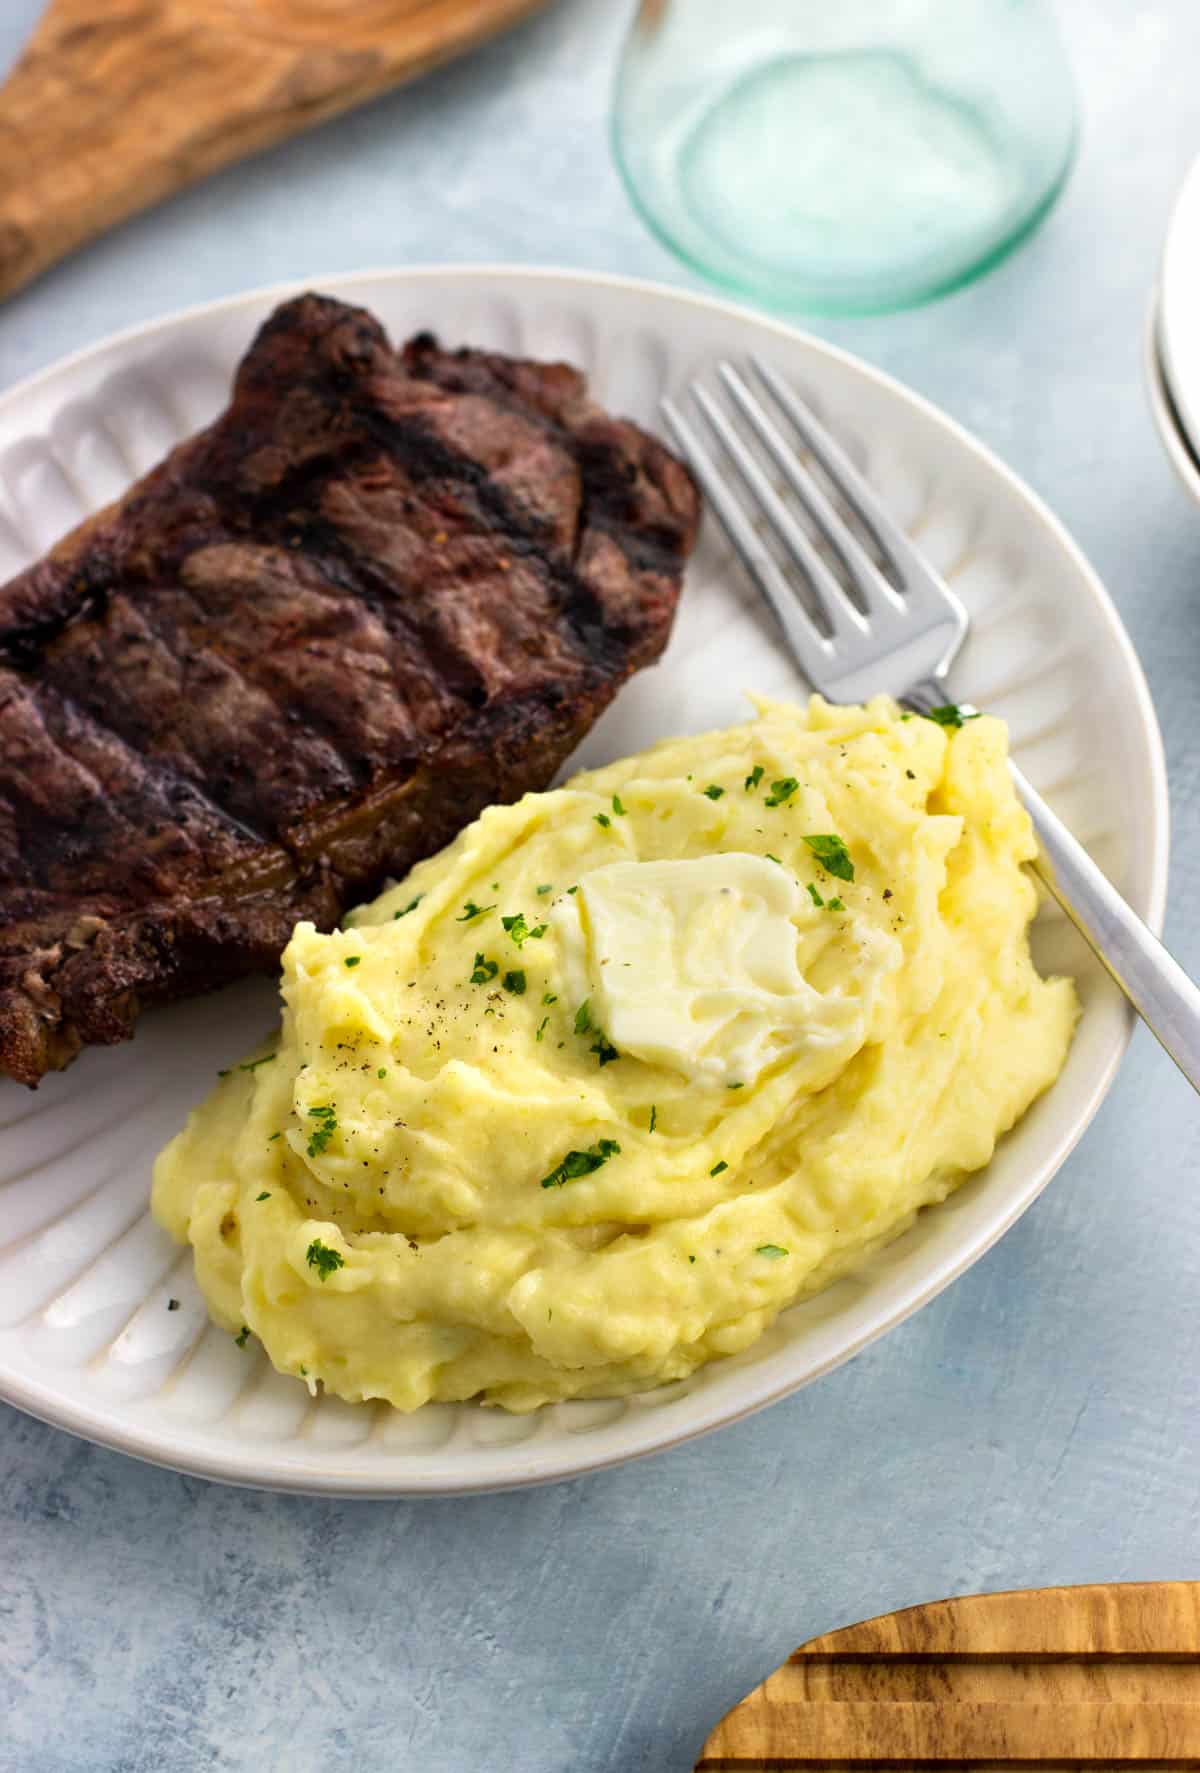 A plate with a grilled steak and side of roasted garlic mashed potatoes.